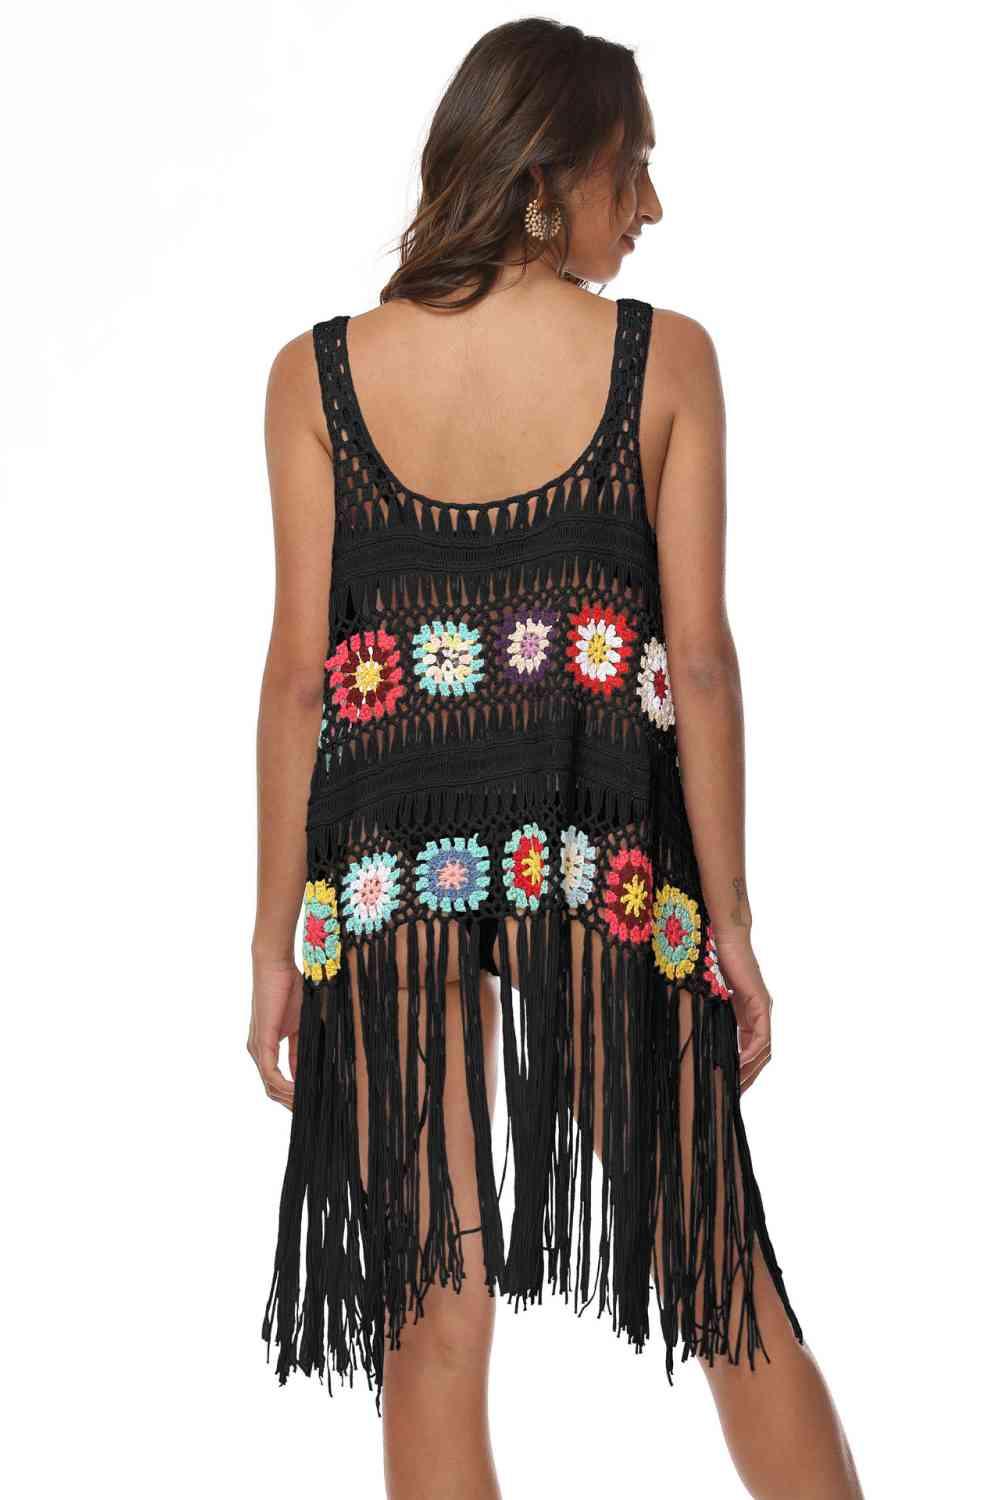 Openwork Fringe Detail Embroidery Sleeveless Cover-Up - Ash Boutique